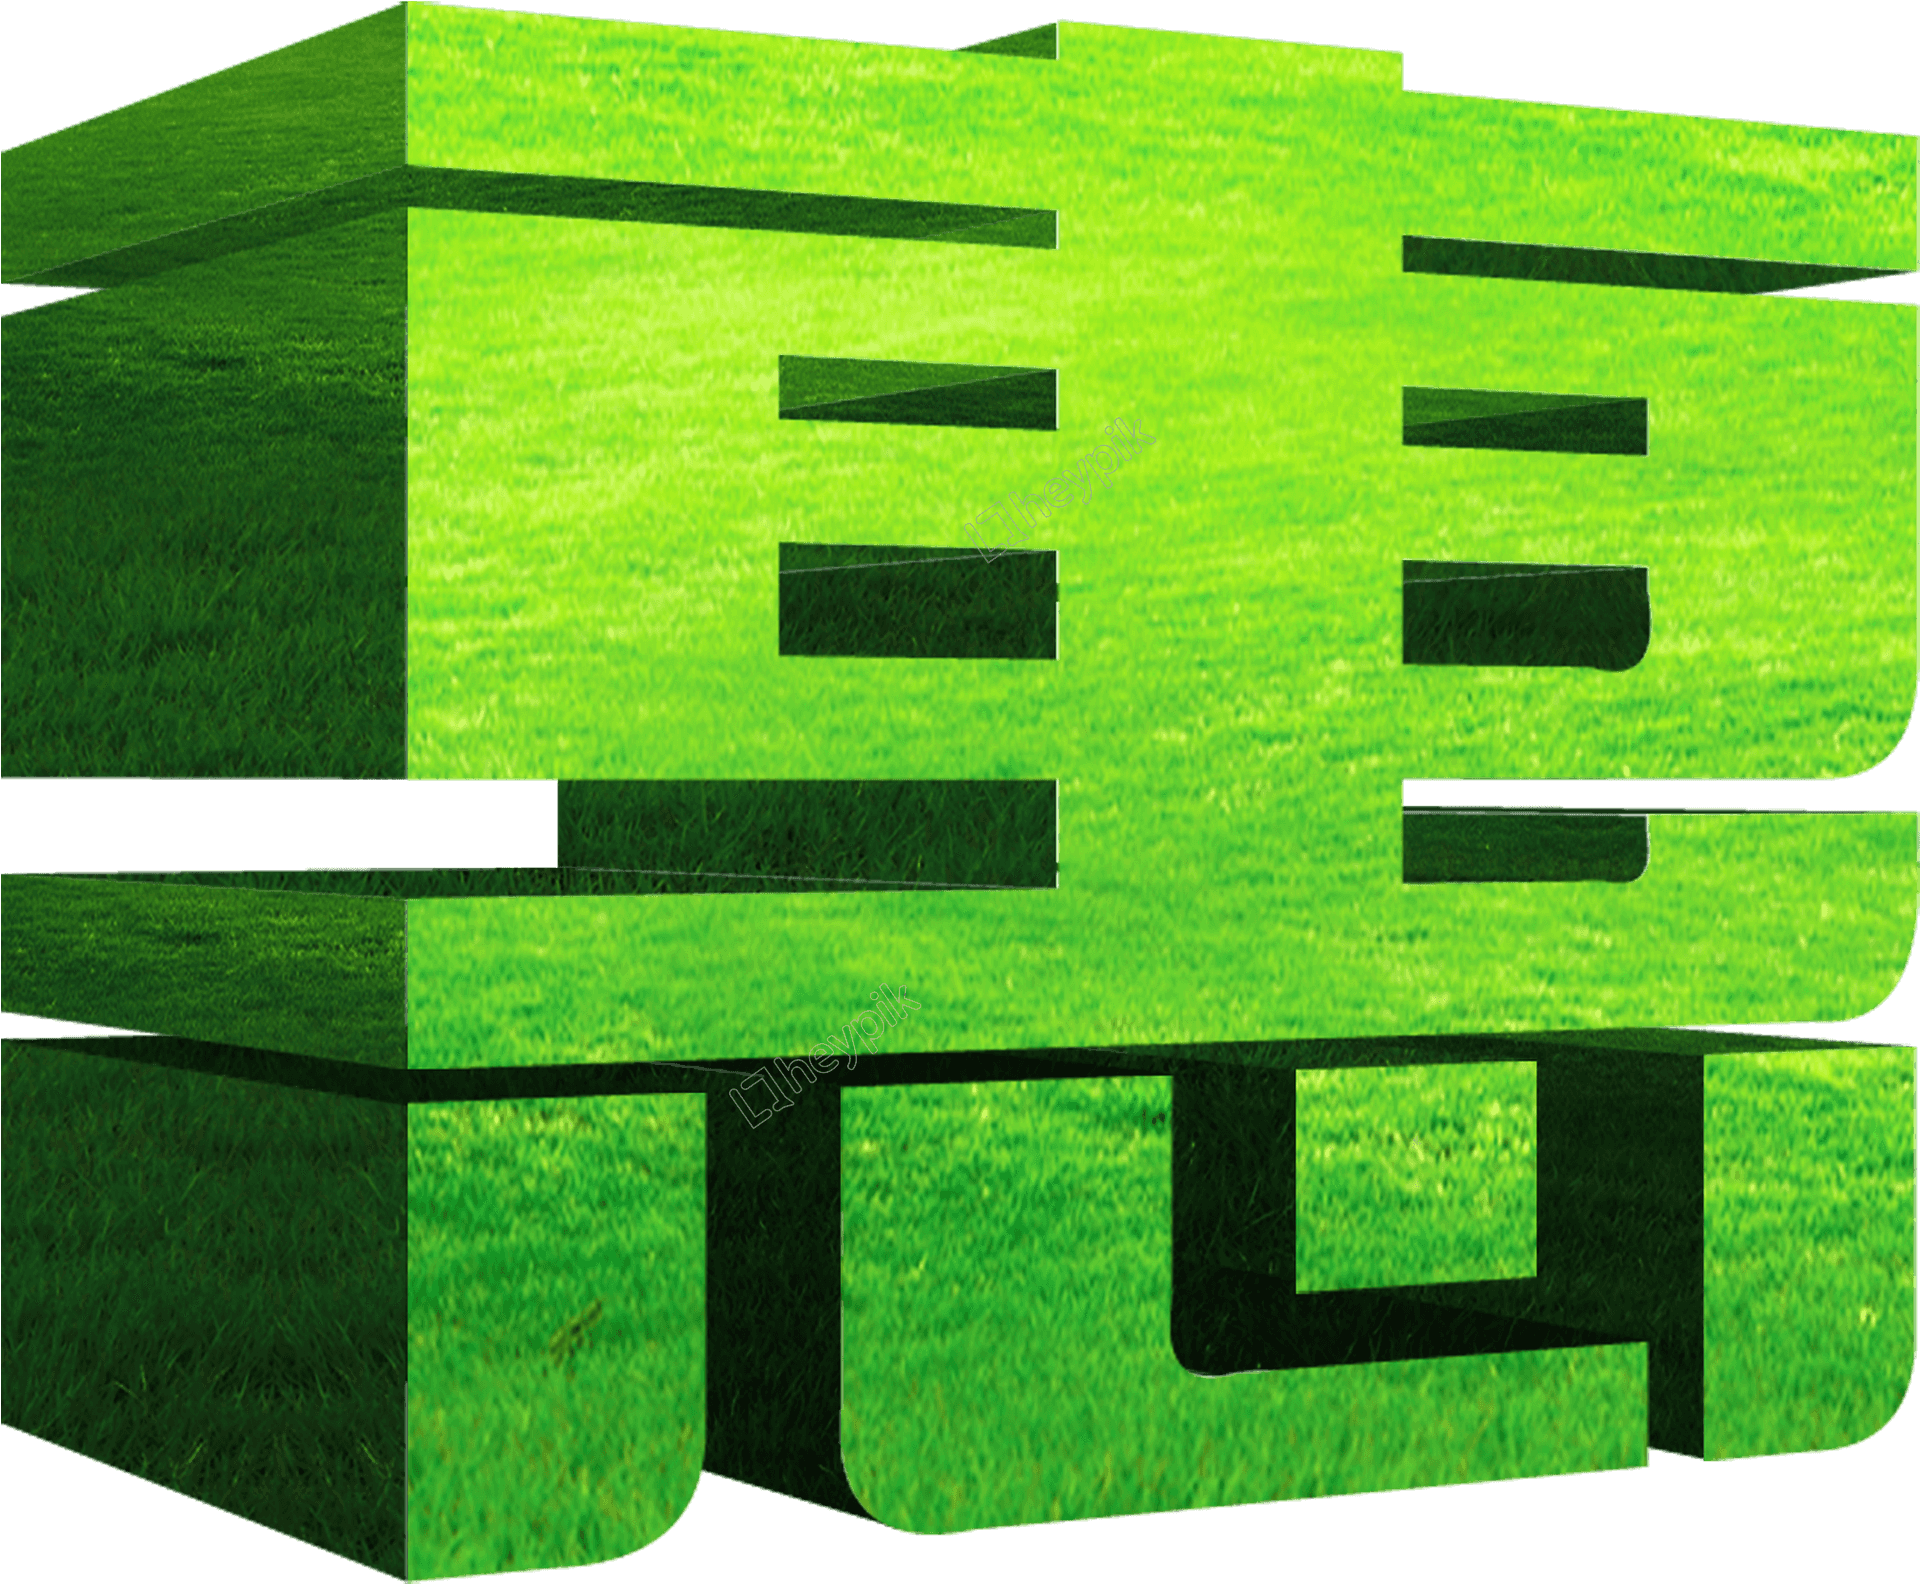 100 Minecraft Grass Block Png Images